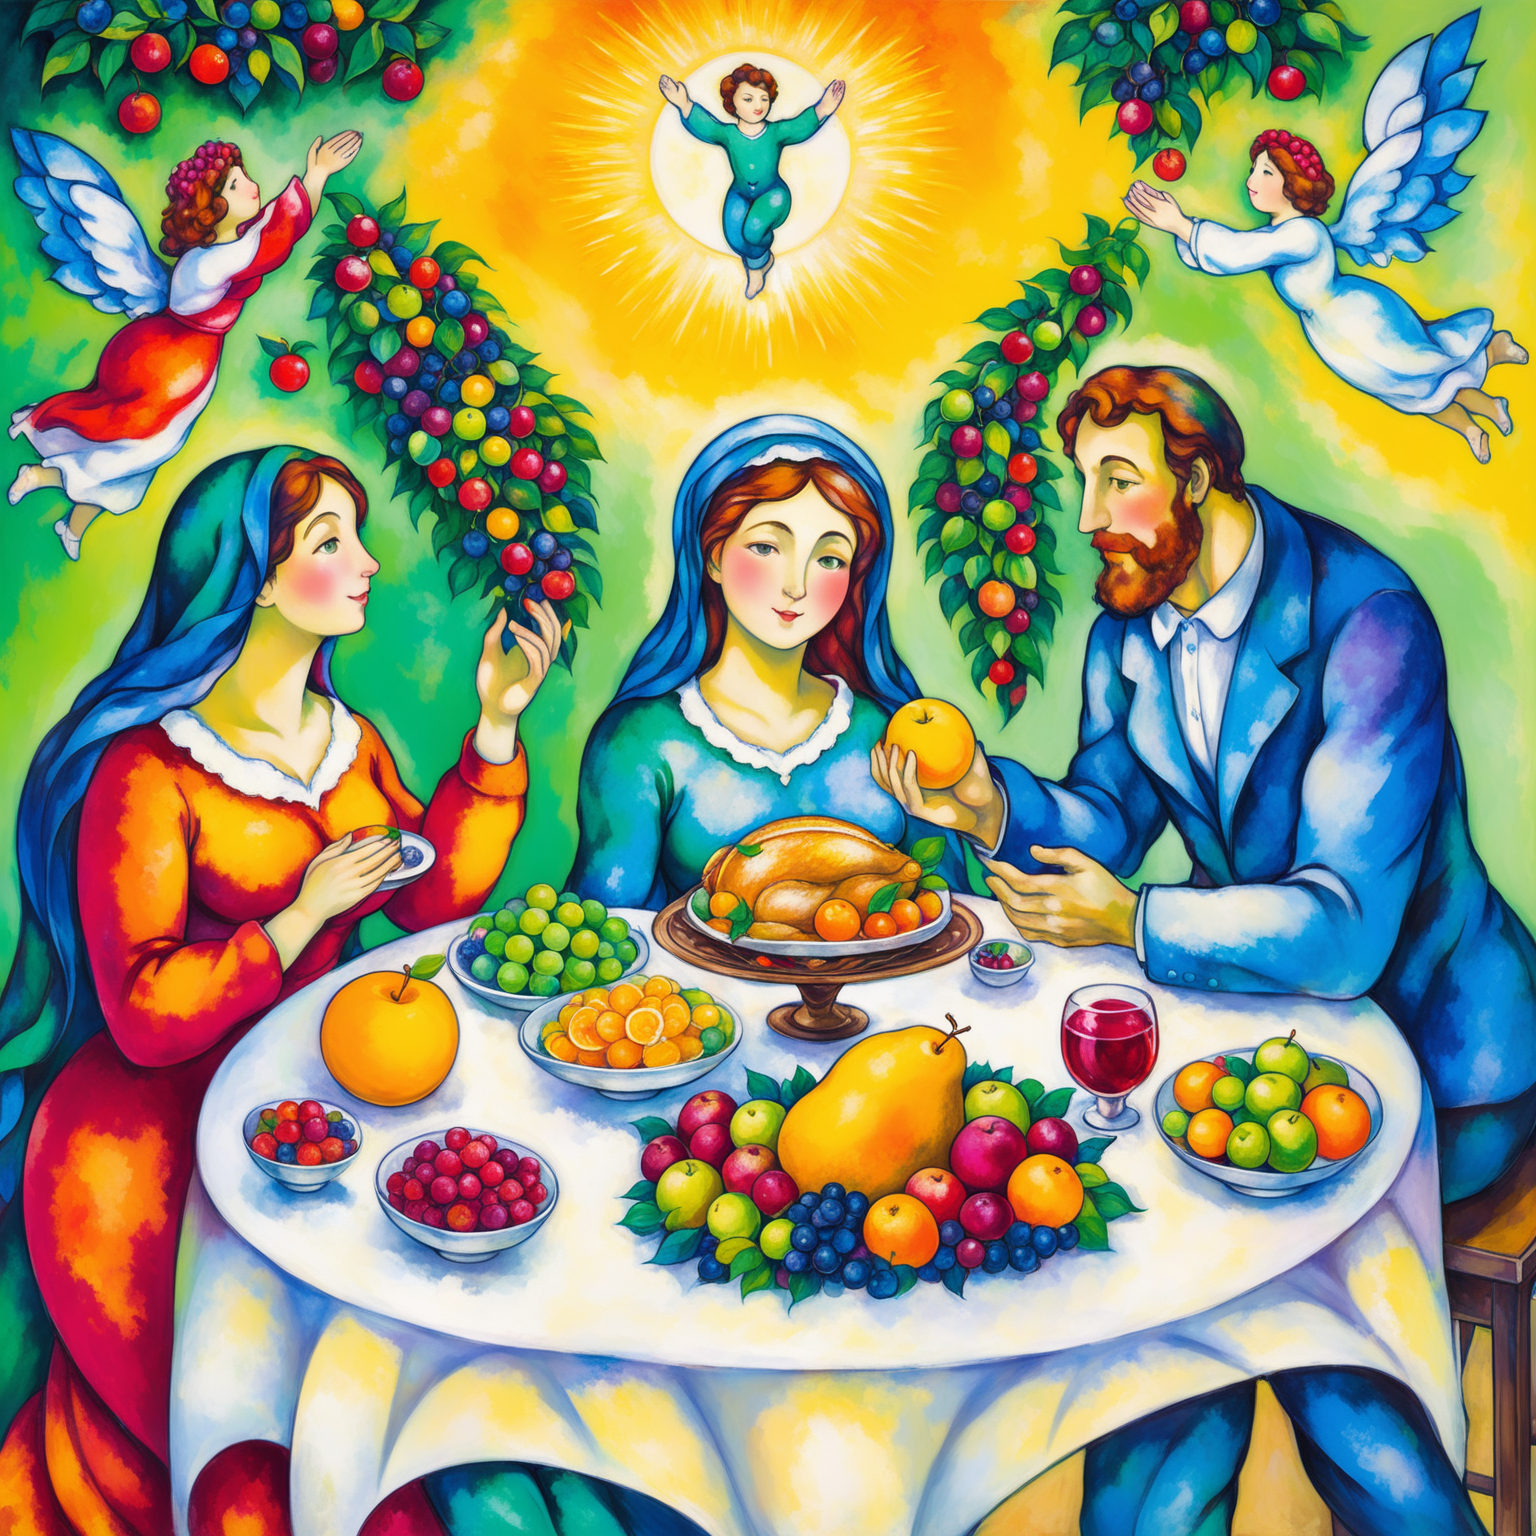 Chagall Style Heavenly Feast with Man Woman and Child Surrounded by Fruits Ethereal Family Gathering